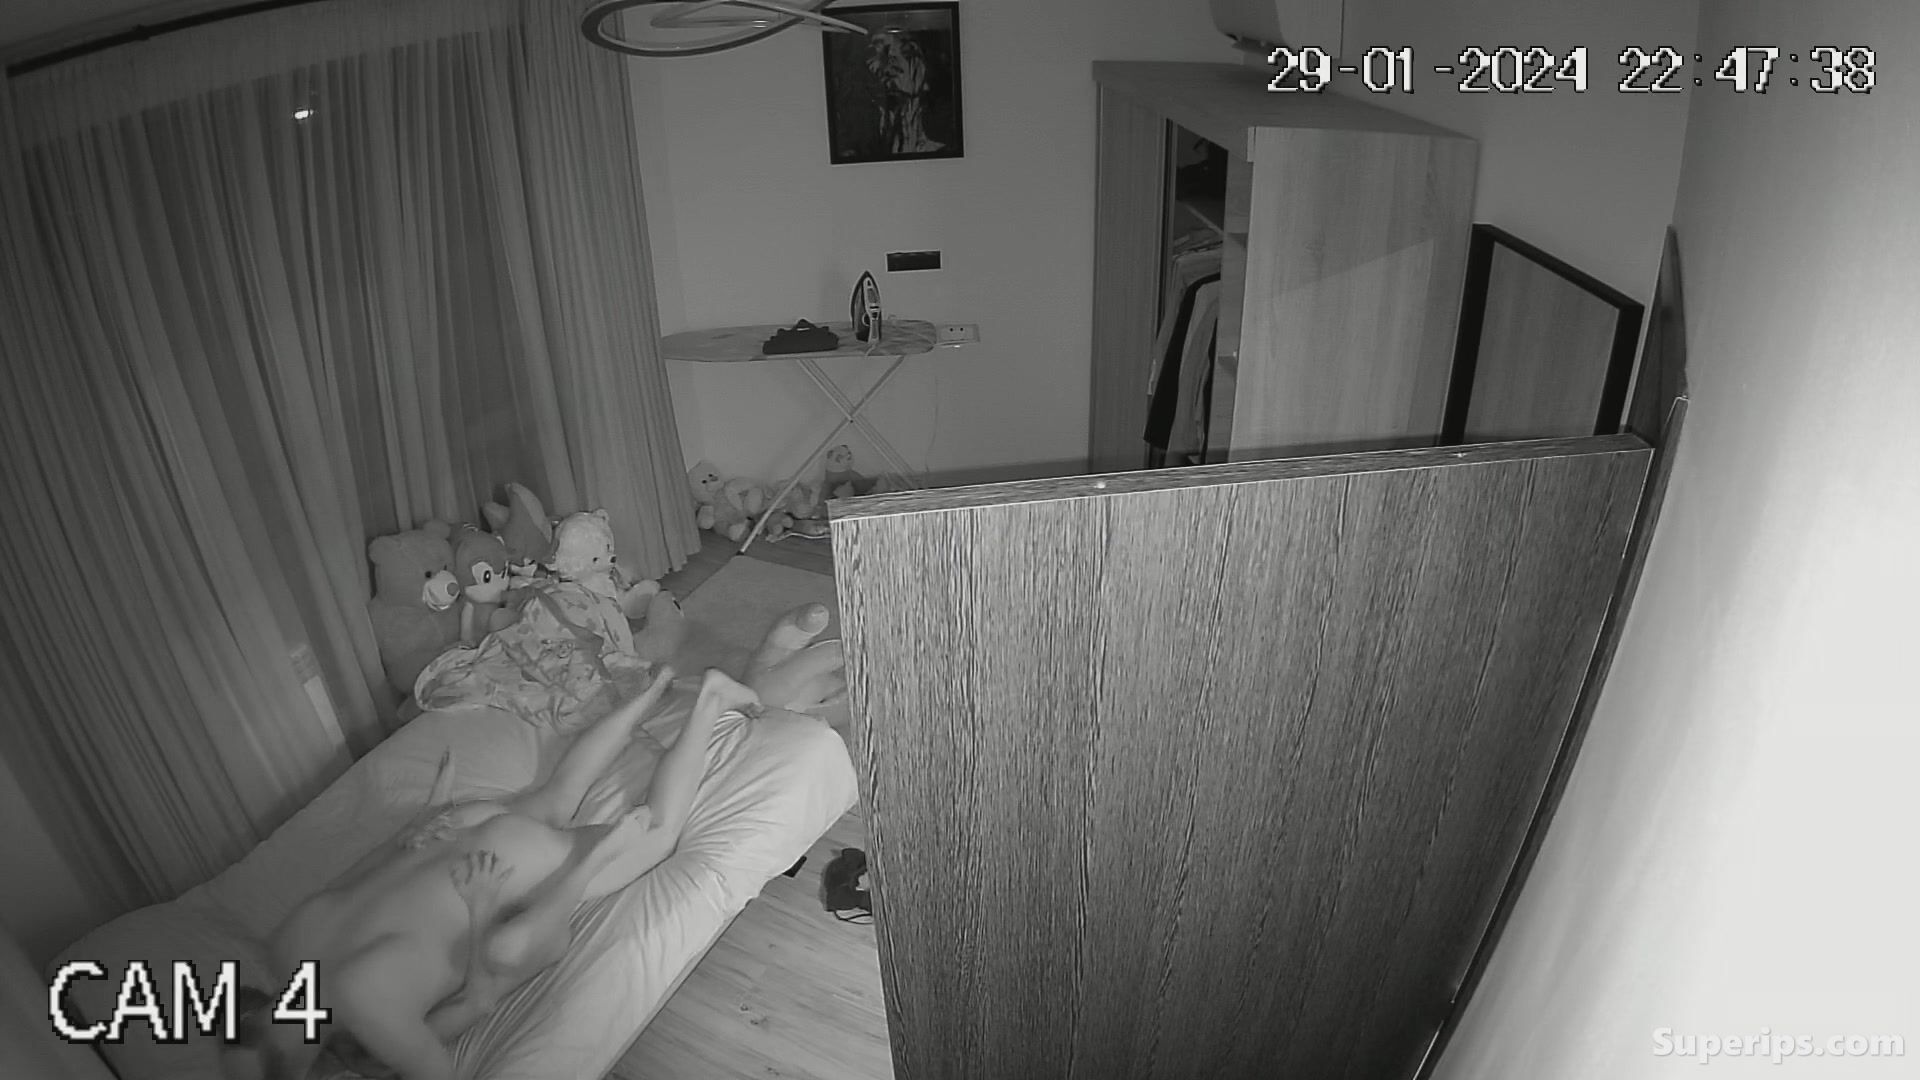 Mature parents fuck in their daughter’s room